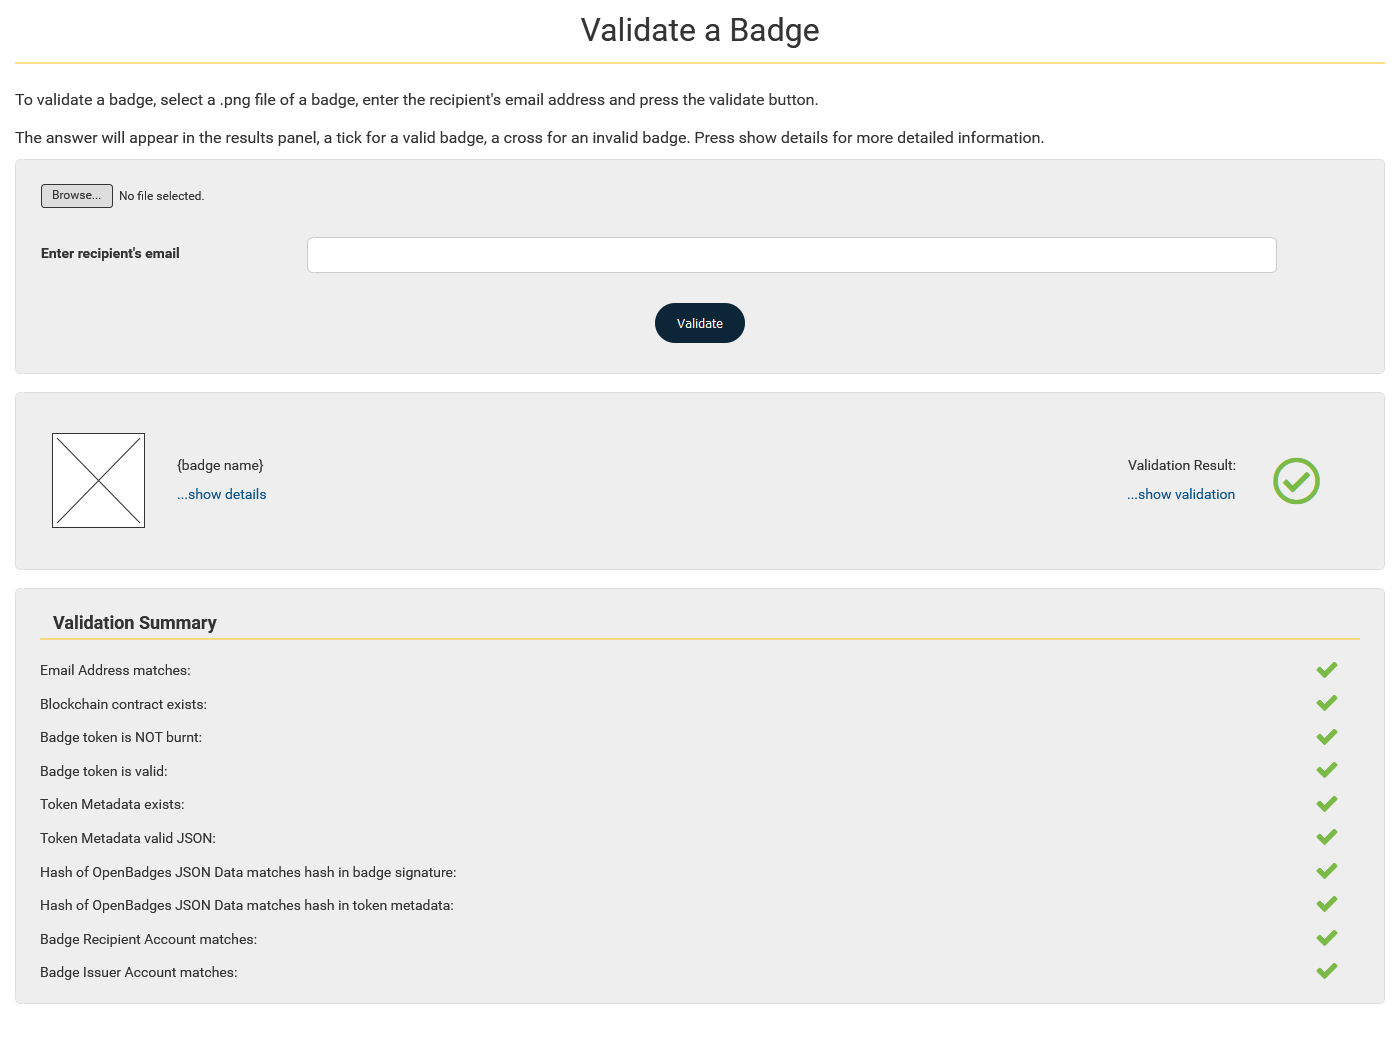 Validate a Badge - Validate - Show Validation screen